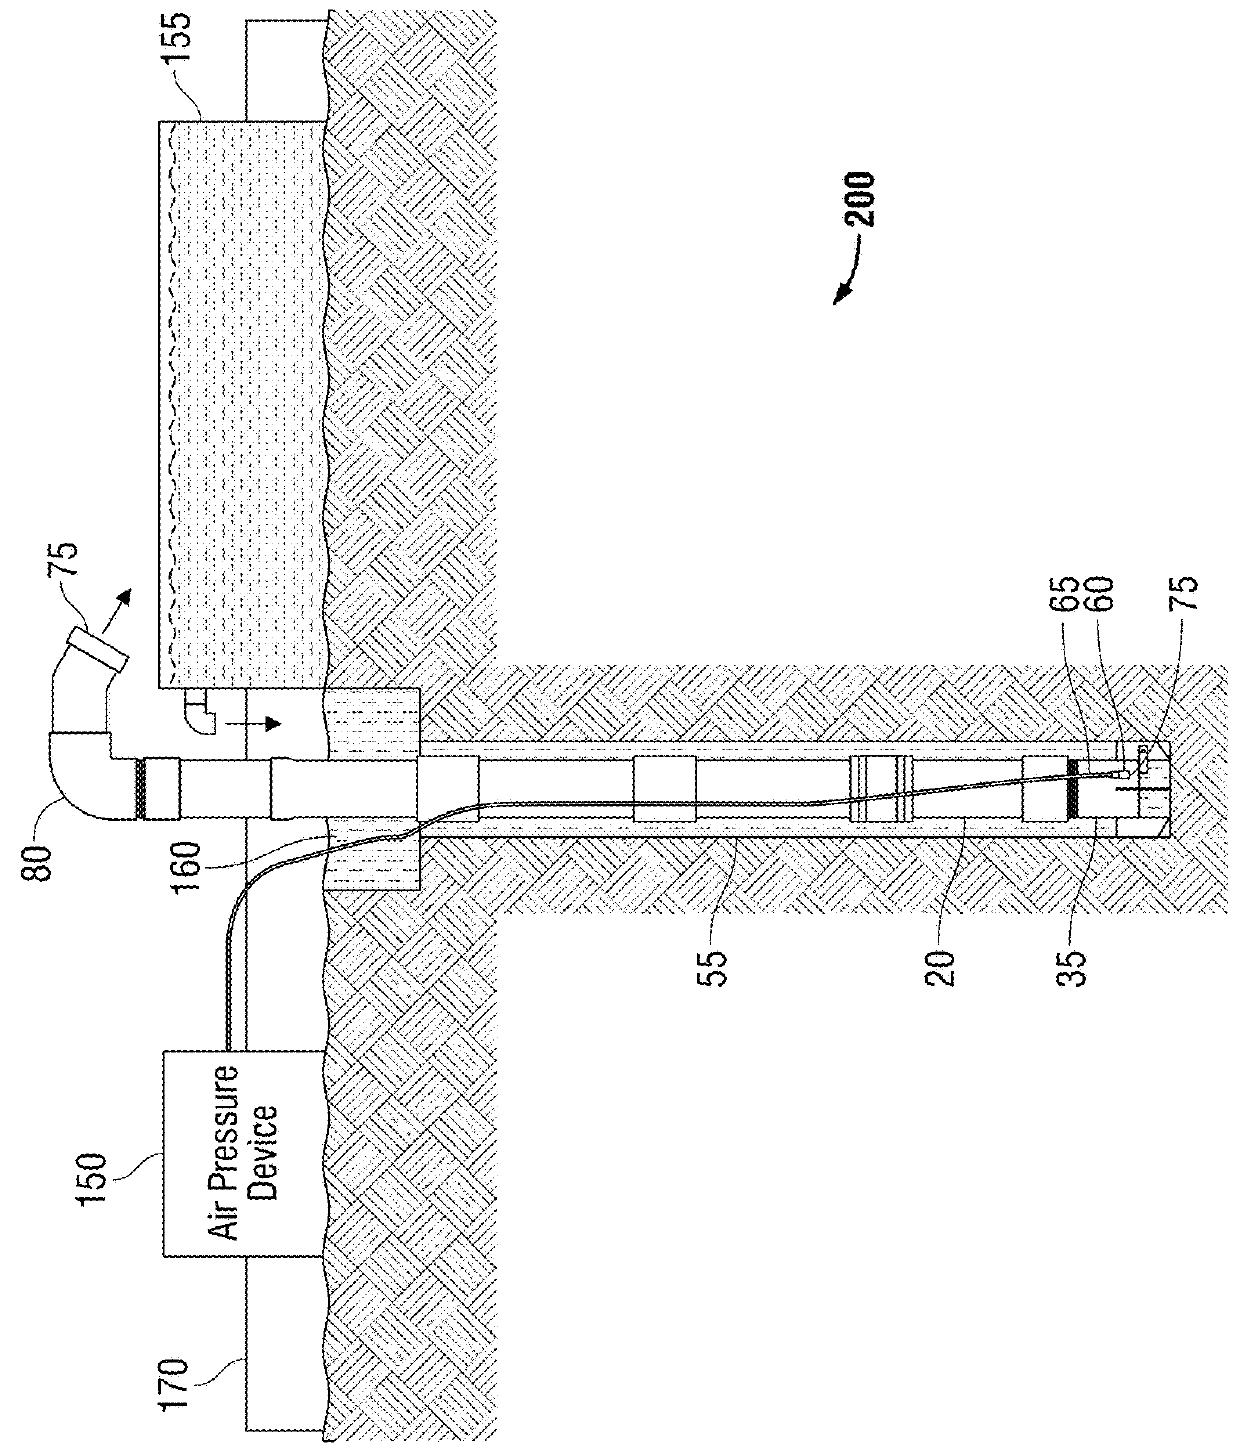 Well-drilling apparatus and method of use